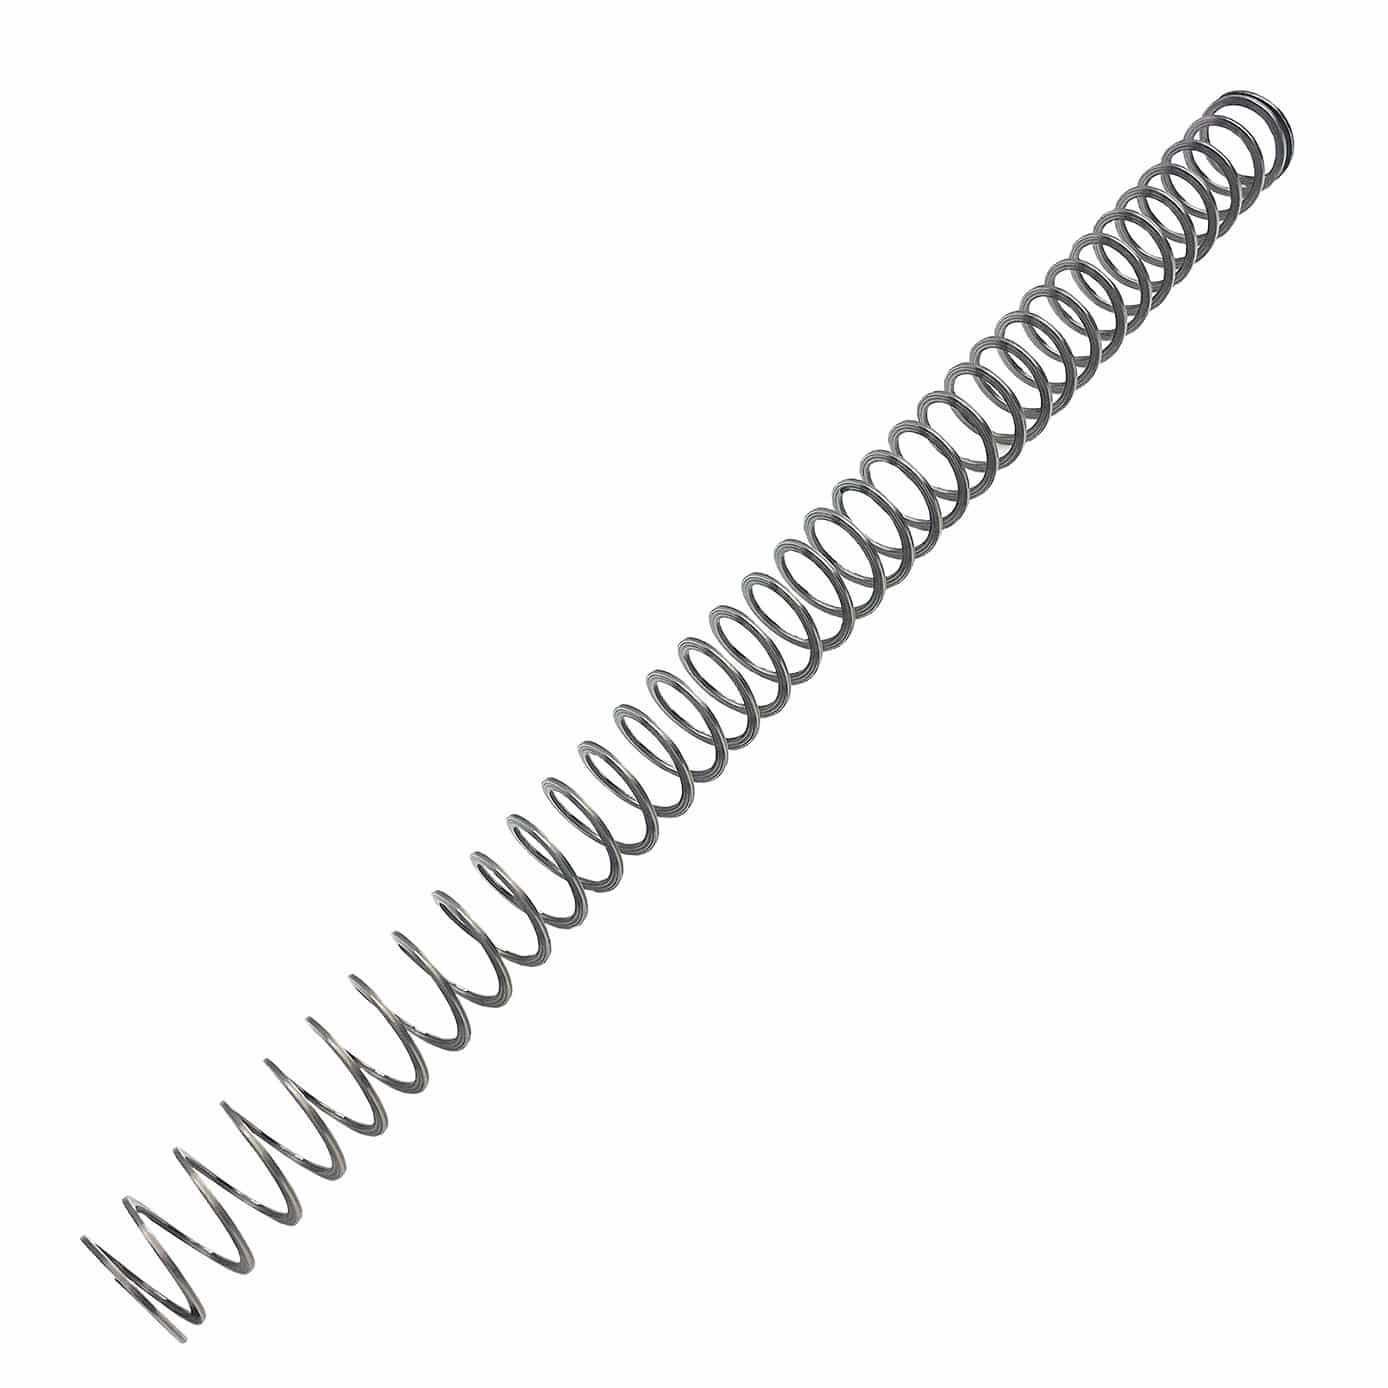 AT3 Tactical Flat Wire AR-15 Buffer Spring